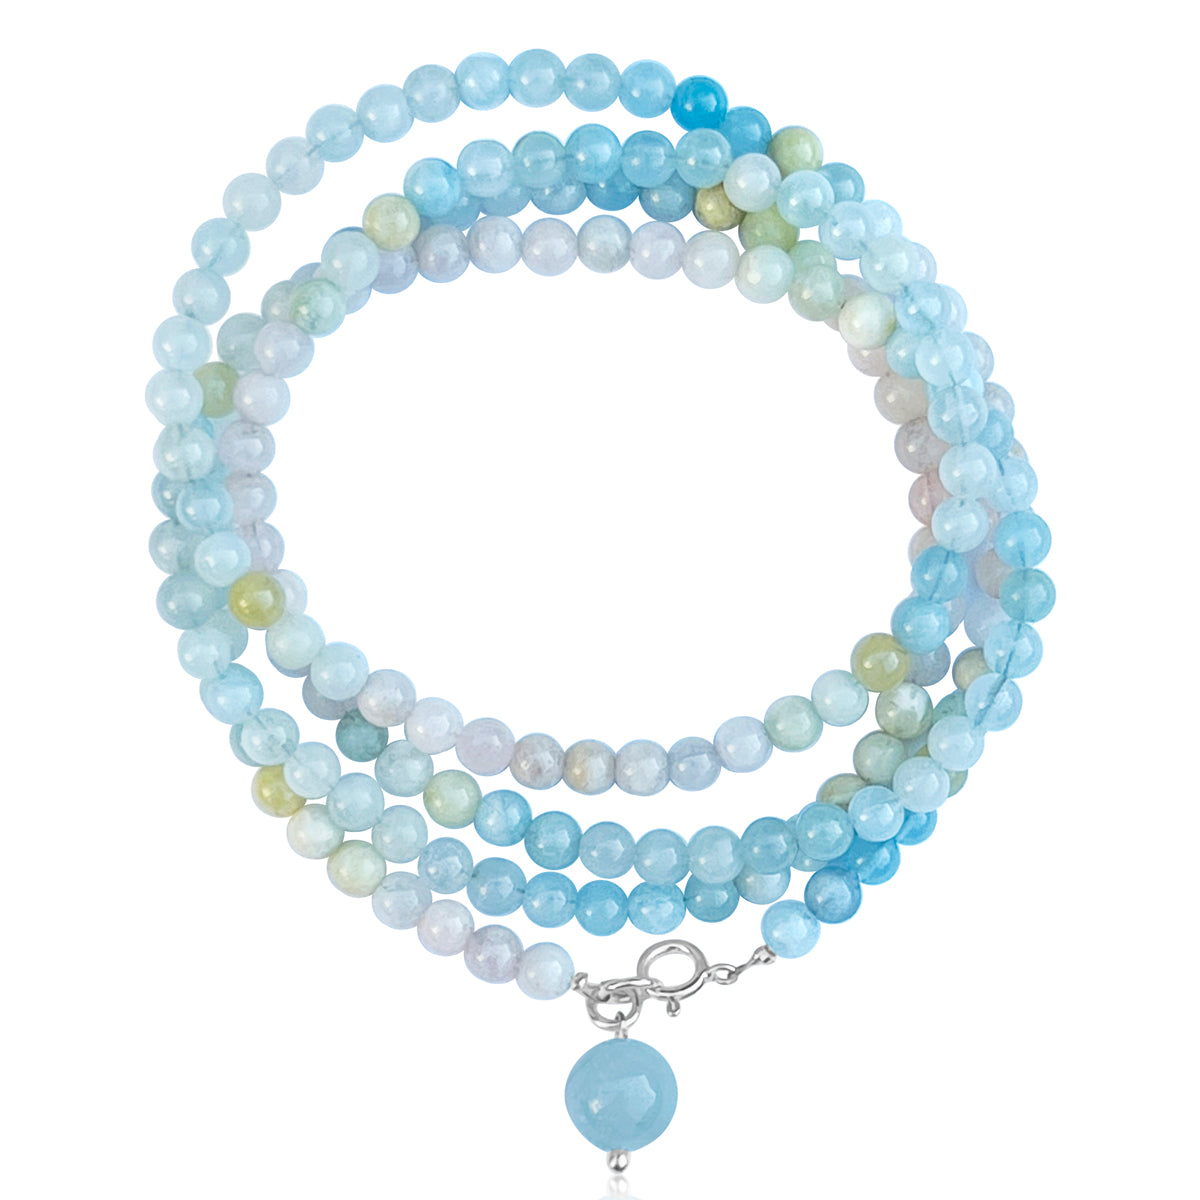 Aquamarine Wrap Bracelet to Help Recharge Your Life Force. Aquamarine evokes the purity of crystalline waters, and the exhilaration and relaxation of the sea. It is calming, soothing, and cleansing, and inspires truth, trust and letting go.